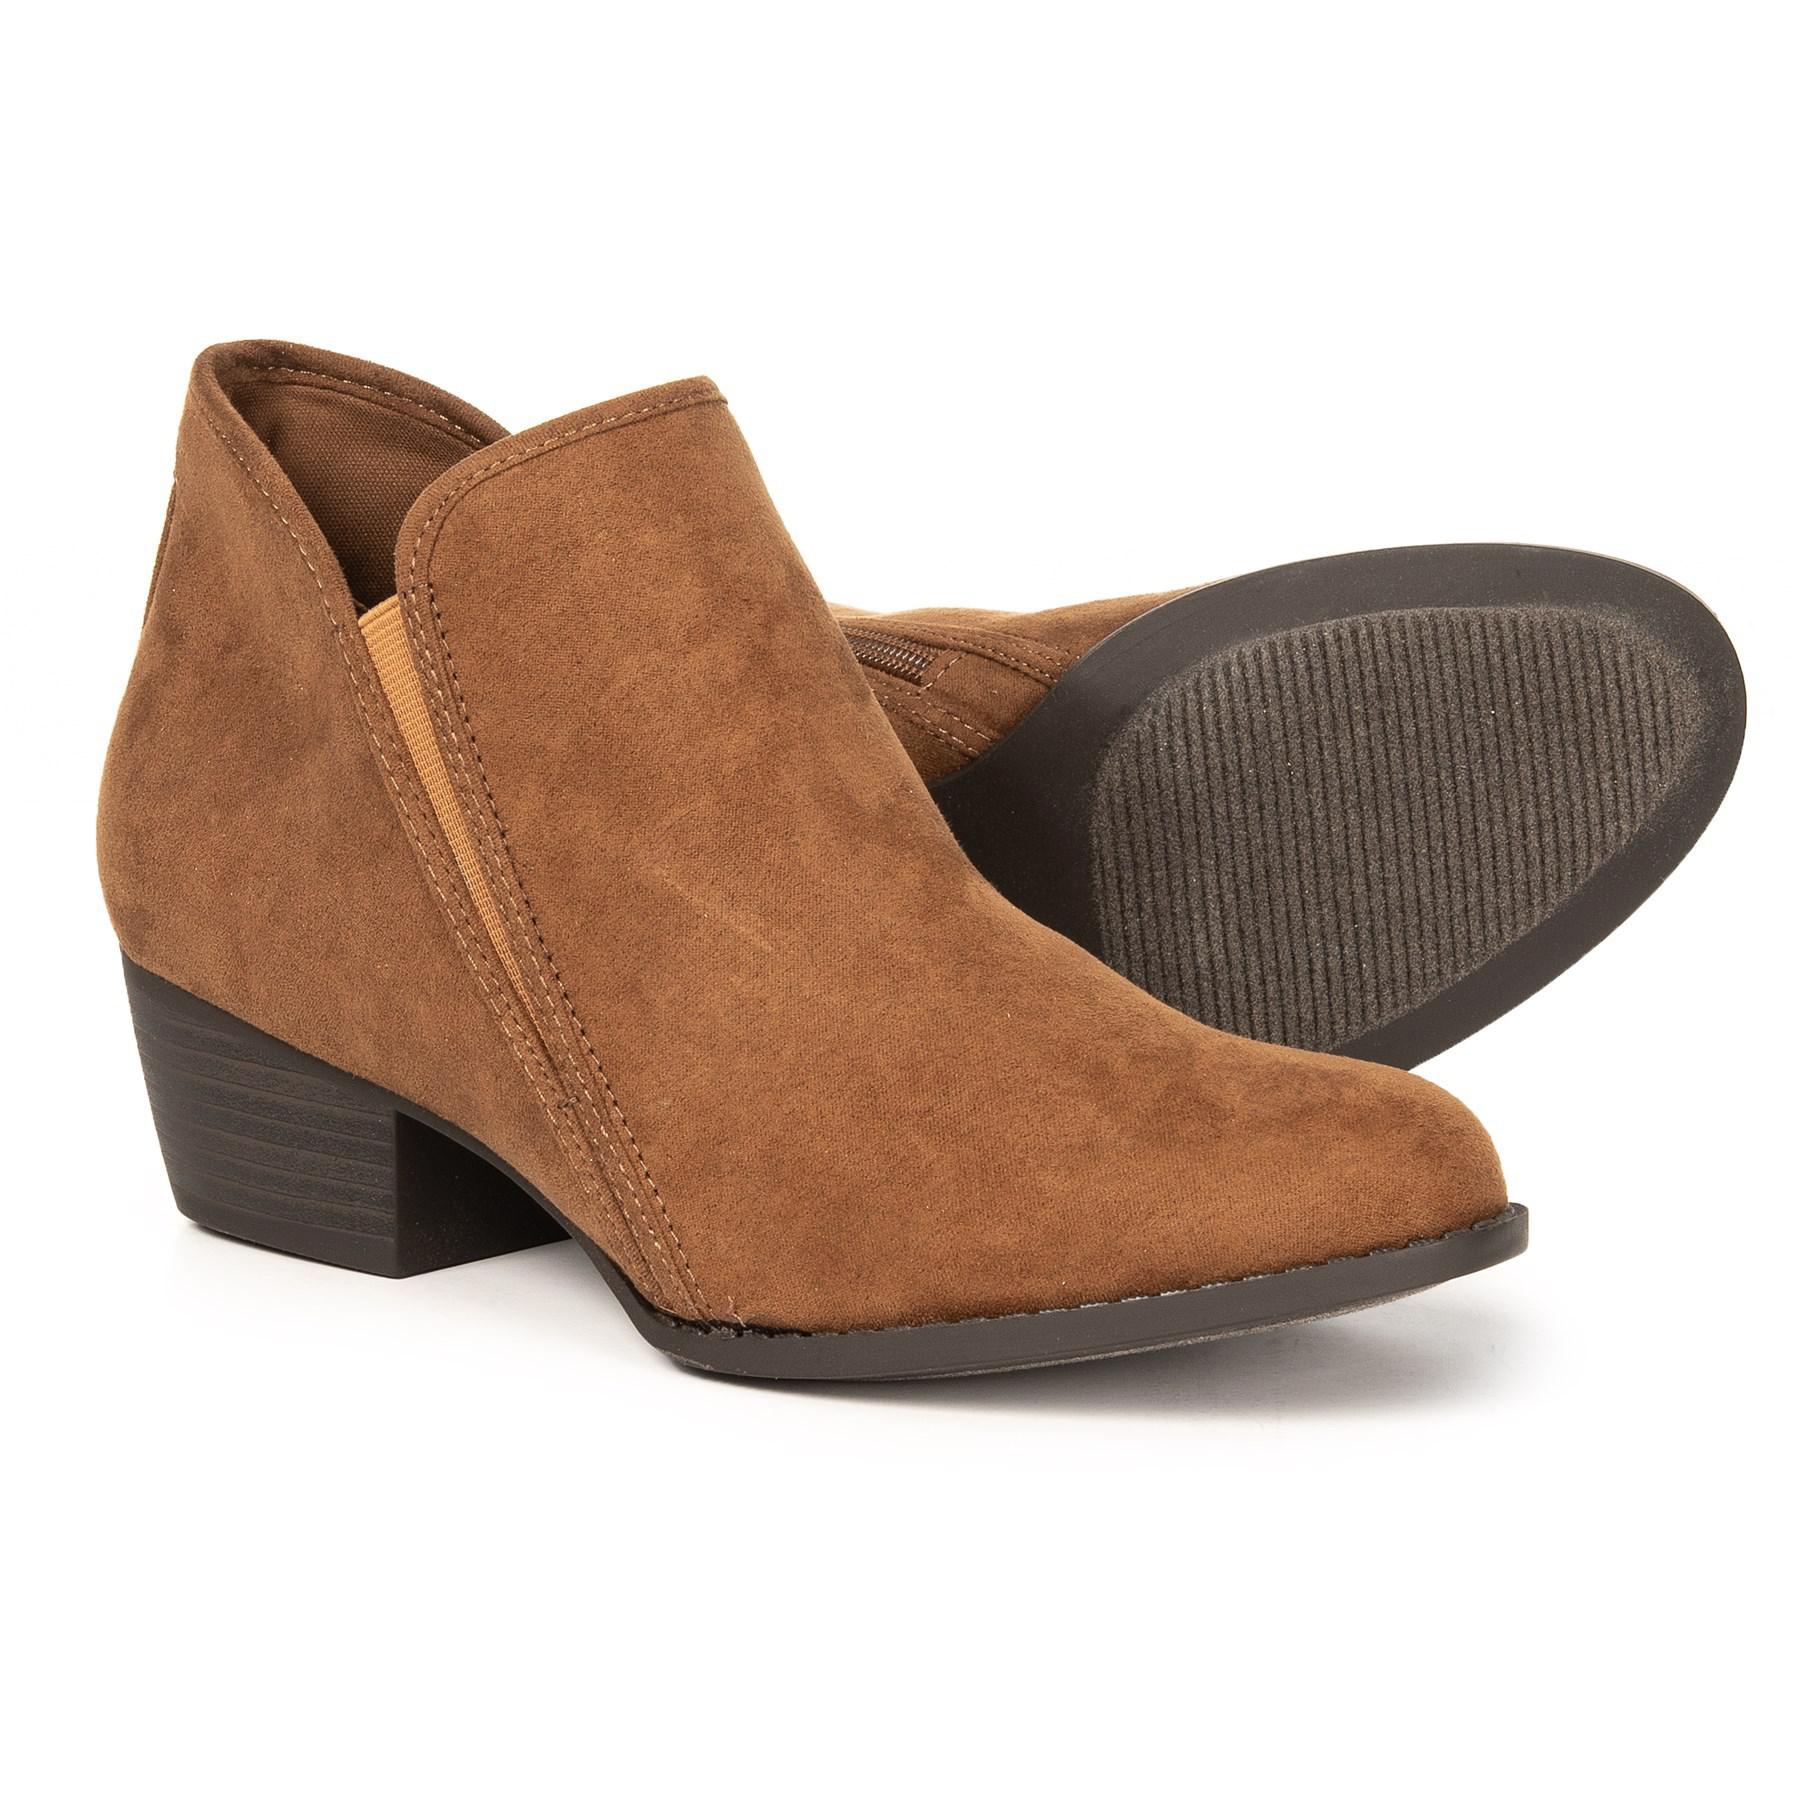 Esprit Hunter Ankle Boots (for Women) in Brown - Lyst